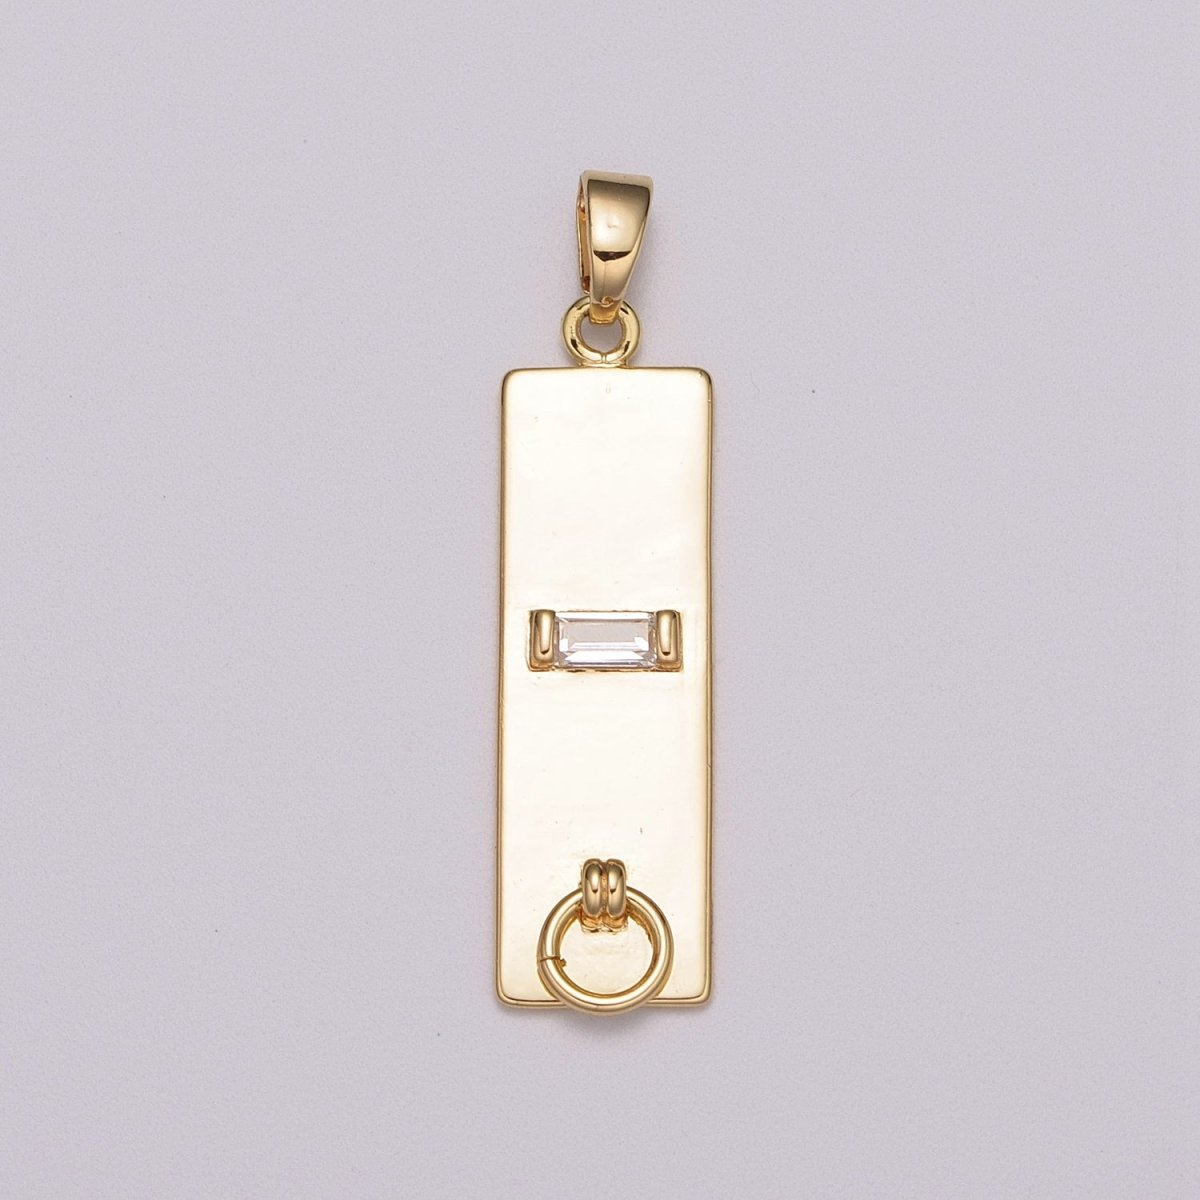 18k Gold Filled Long Rectangle Pendant Minimalist Geometry Jewelry Supply Component N-1408 - DLUXCA